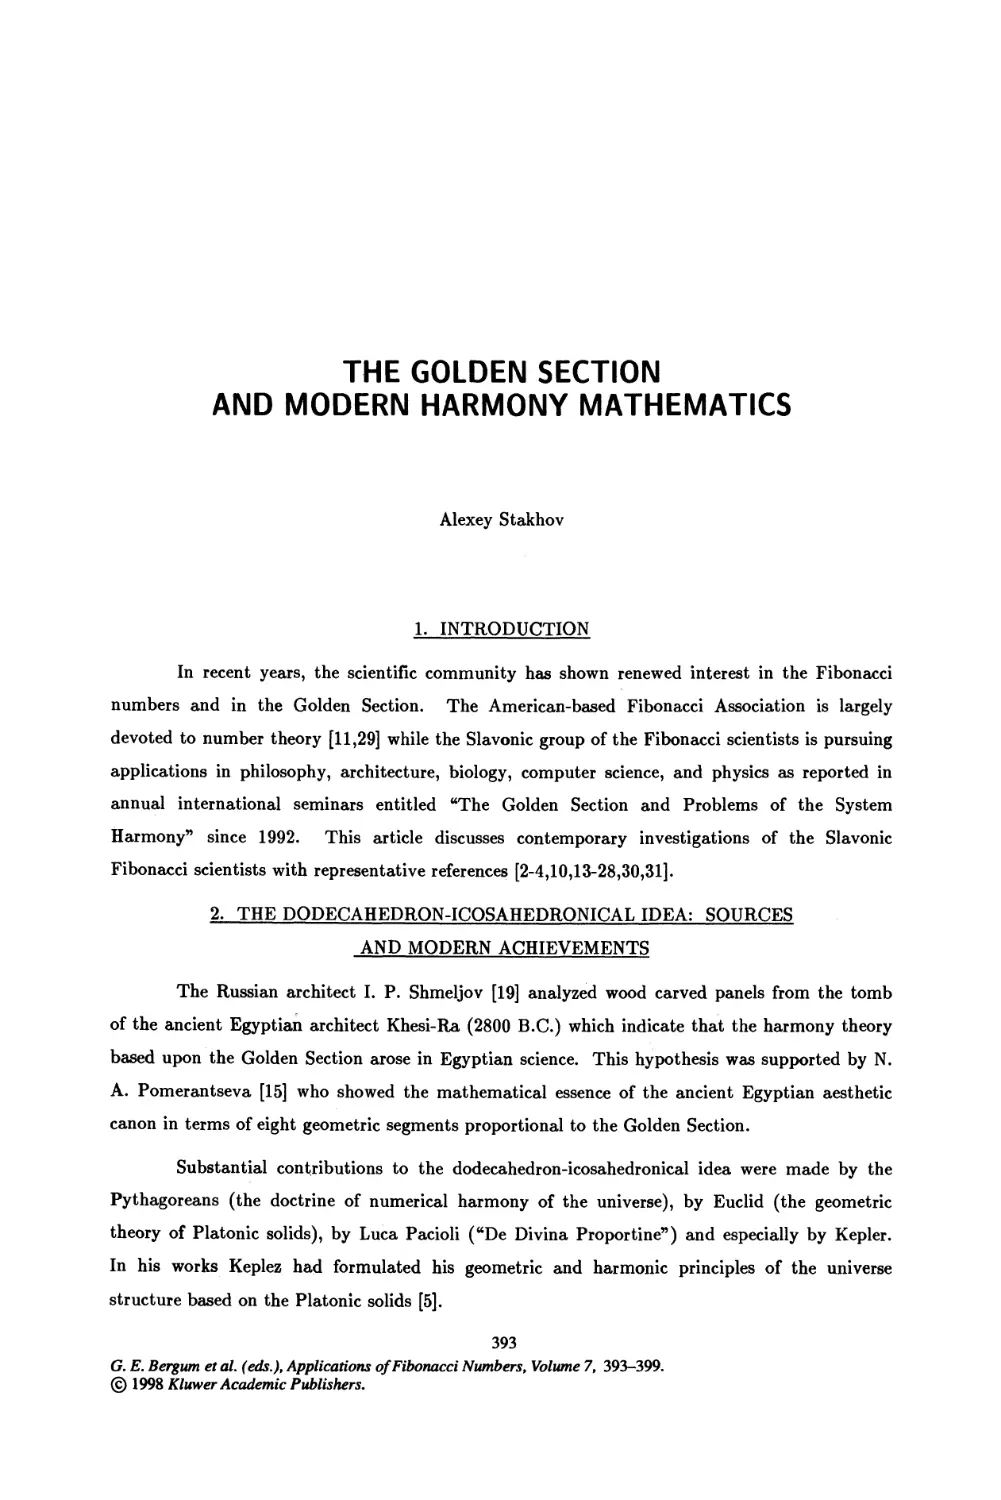 43. The Golden Section and Modern Harmony Mathematics